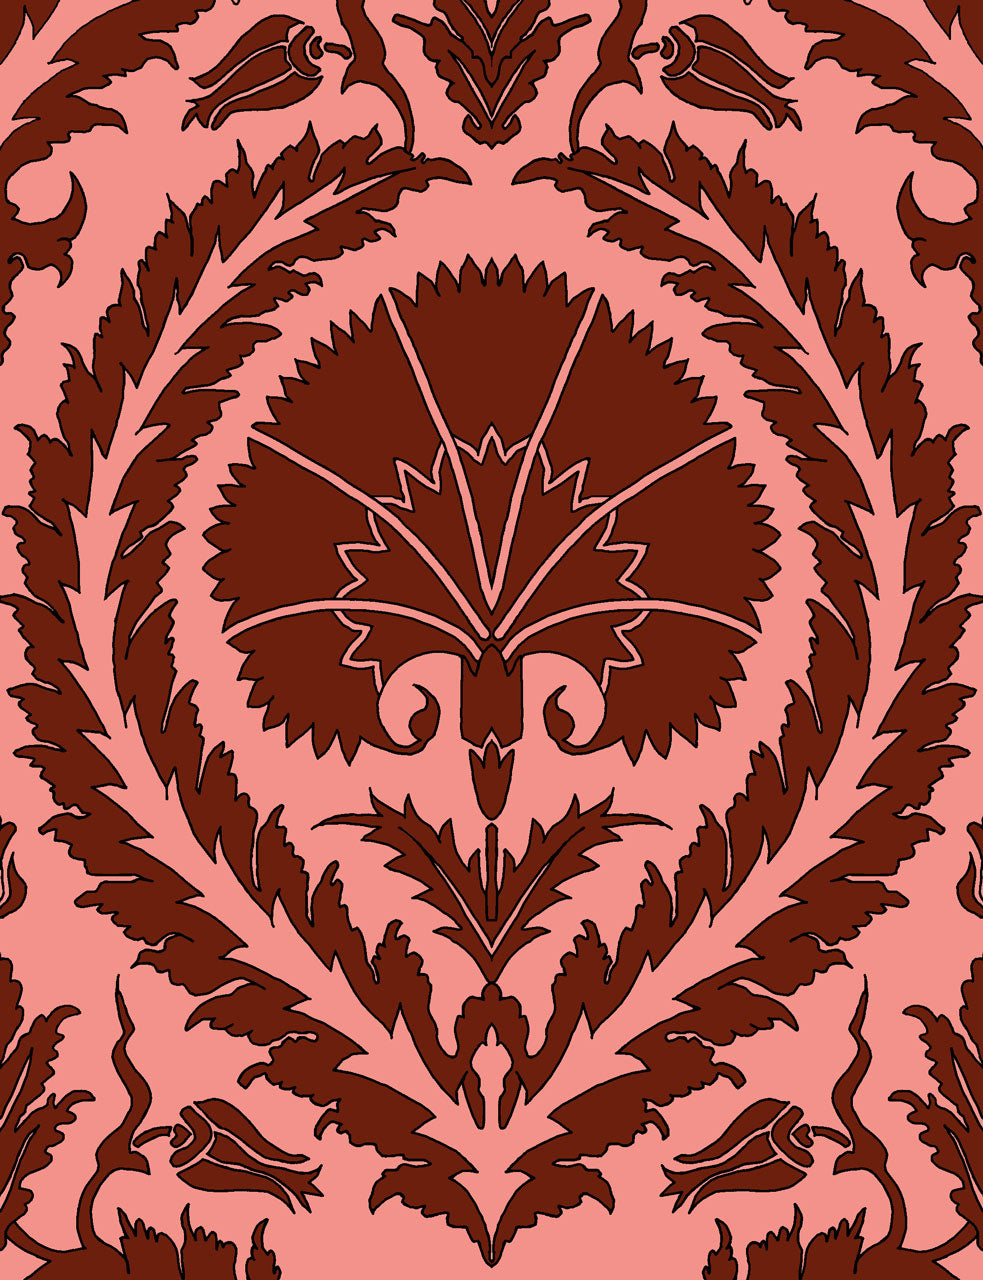 Wallpaper Acanthus and Wreath Red on Pink - £37.50 per sq metre